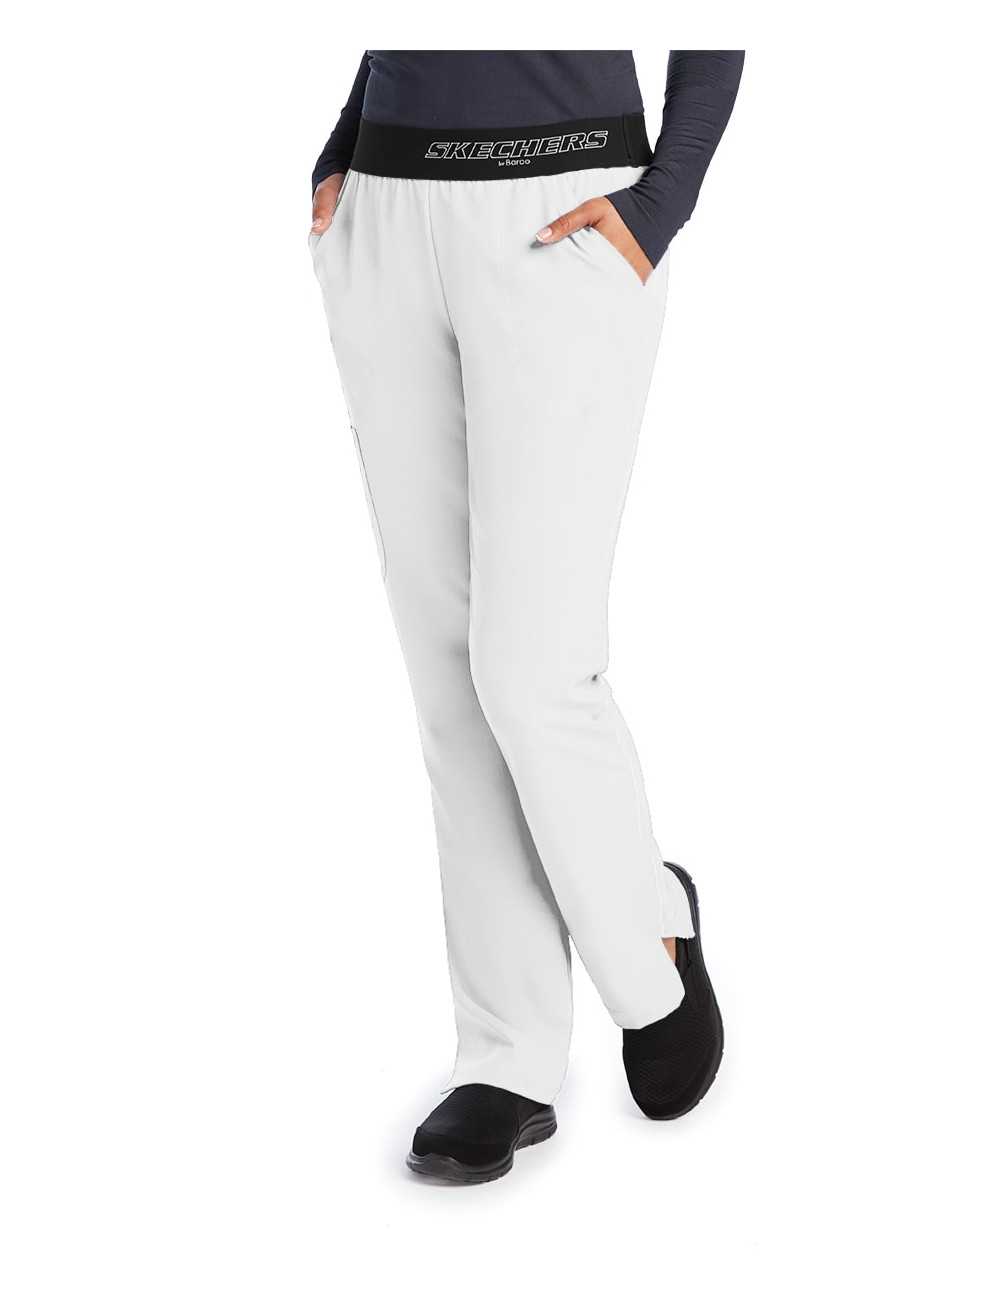 https://www.mankaia.com/14731-zoom_product/women-s-medical-trousers-skechers-collection-sk202-.jpg